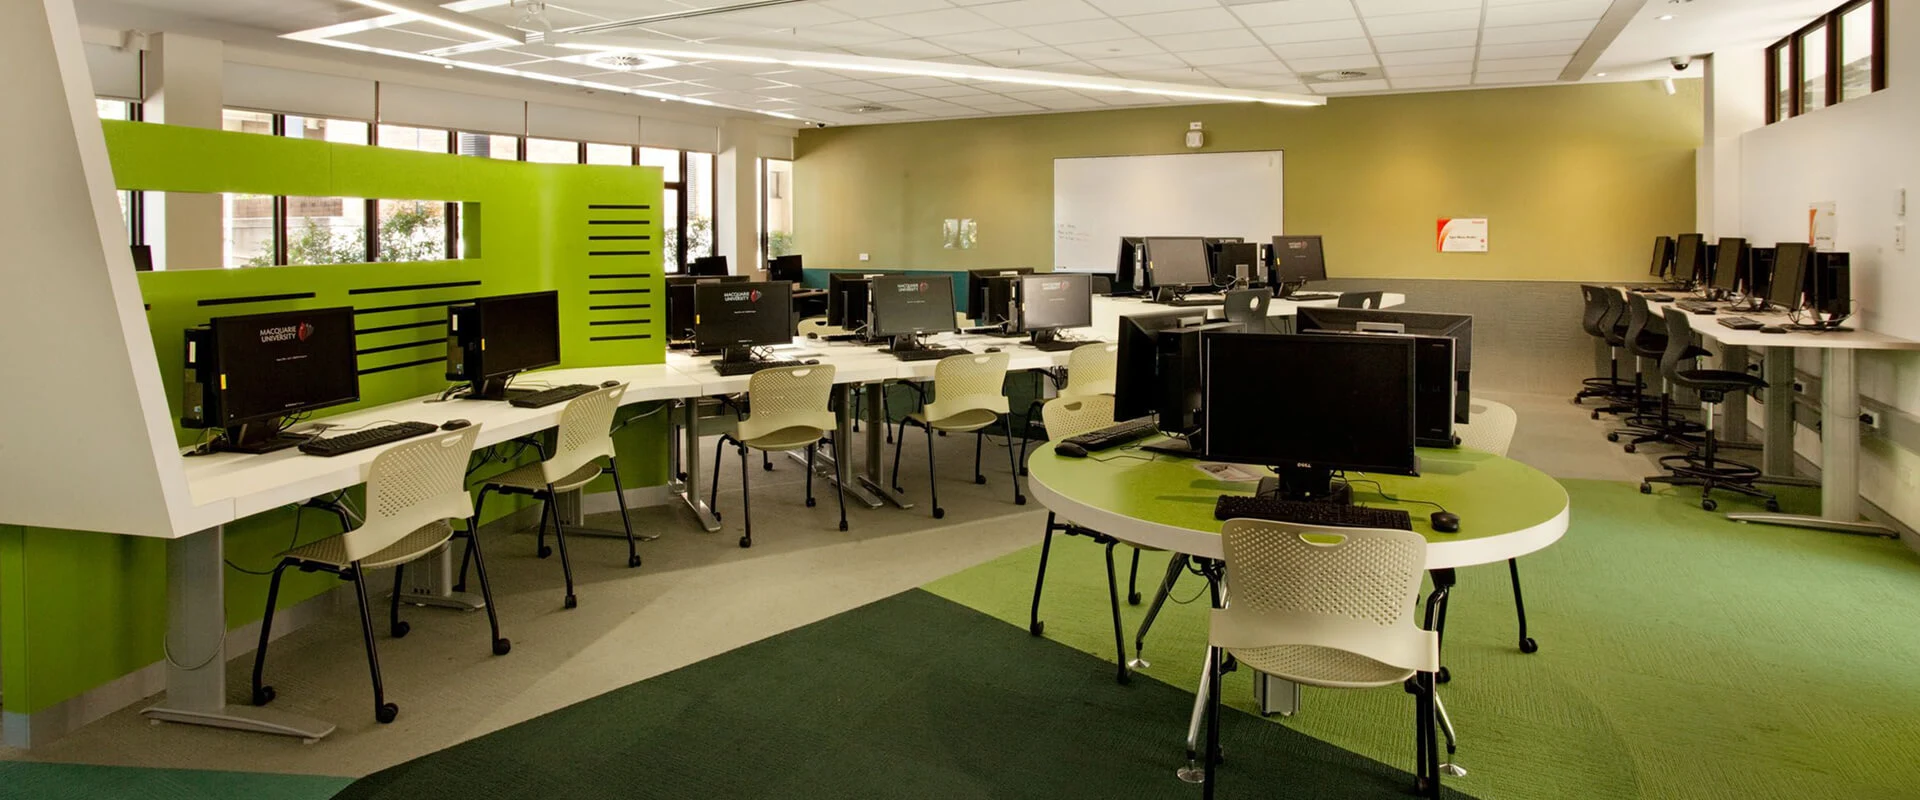 School computer room Ideas - Computer room in school - Freelancer and gamer computer room setup design picture for idea - mrlaboratory.info